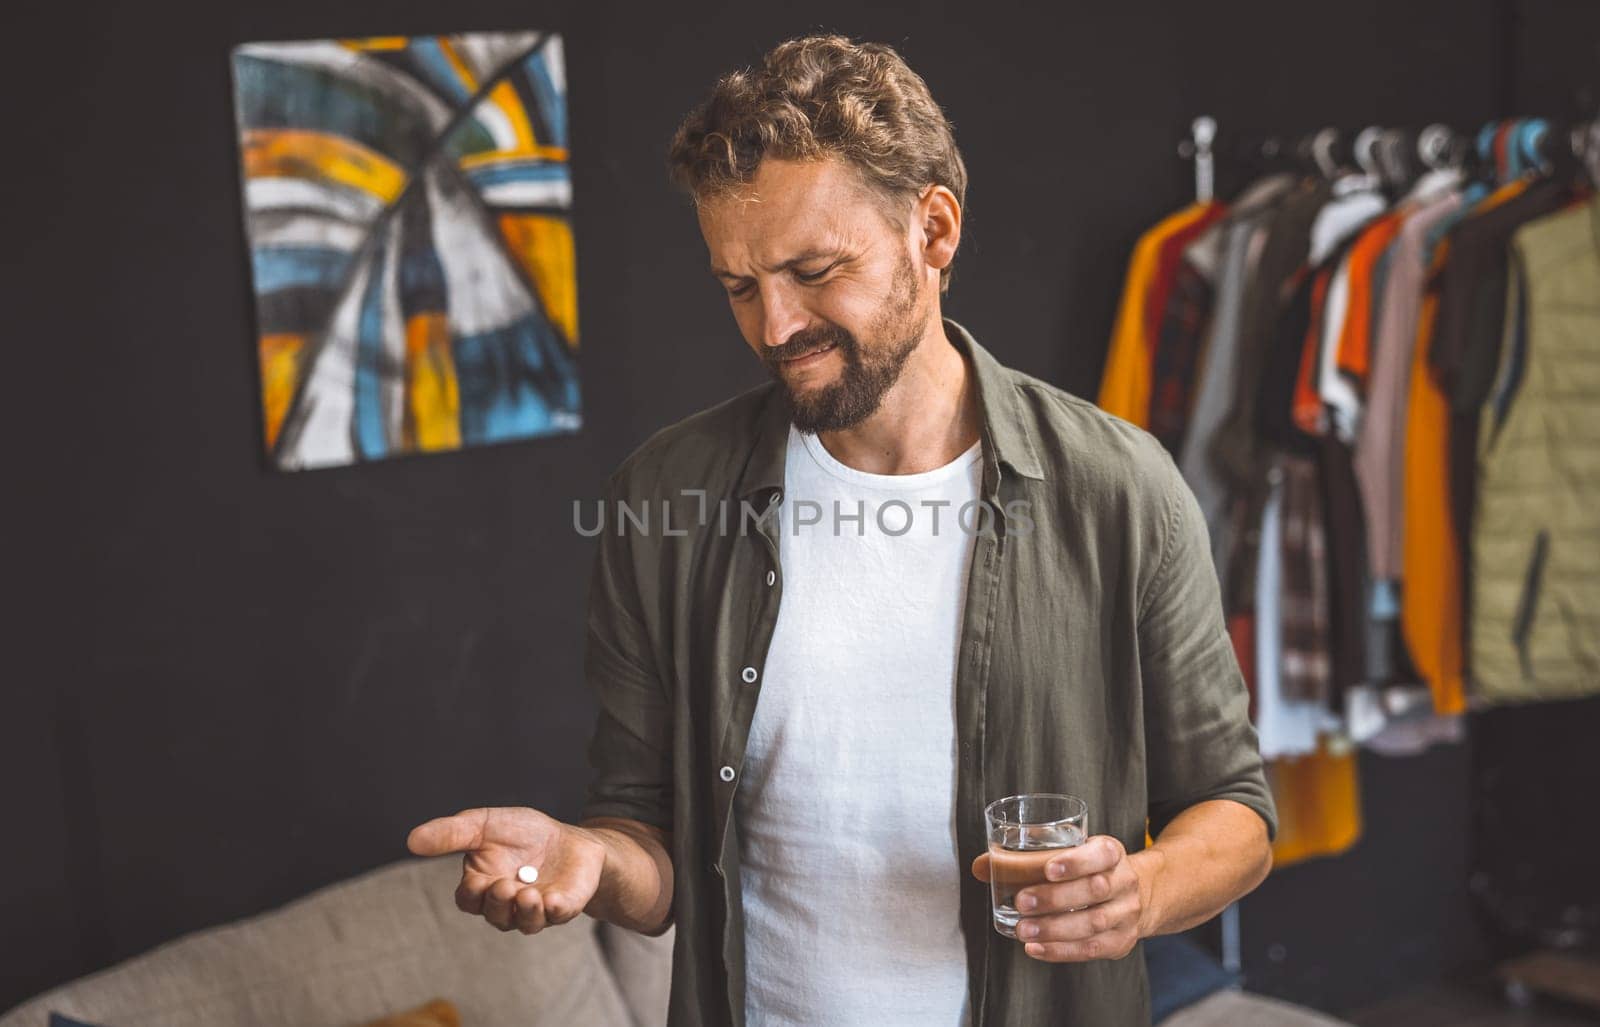 Man holding pill in one hand and glass of water in the other, isolated at home. Concepts of healthcare, wellness, and staying home for quarantine or isolation. The man is indoors and focused on taking his medication, while the glass of water provides a sense of refreshment and hydration. by LipikStockMedia